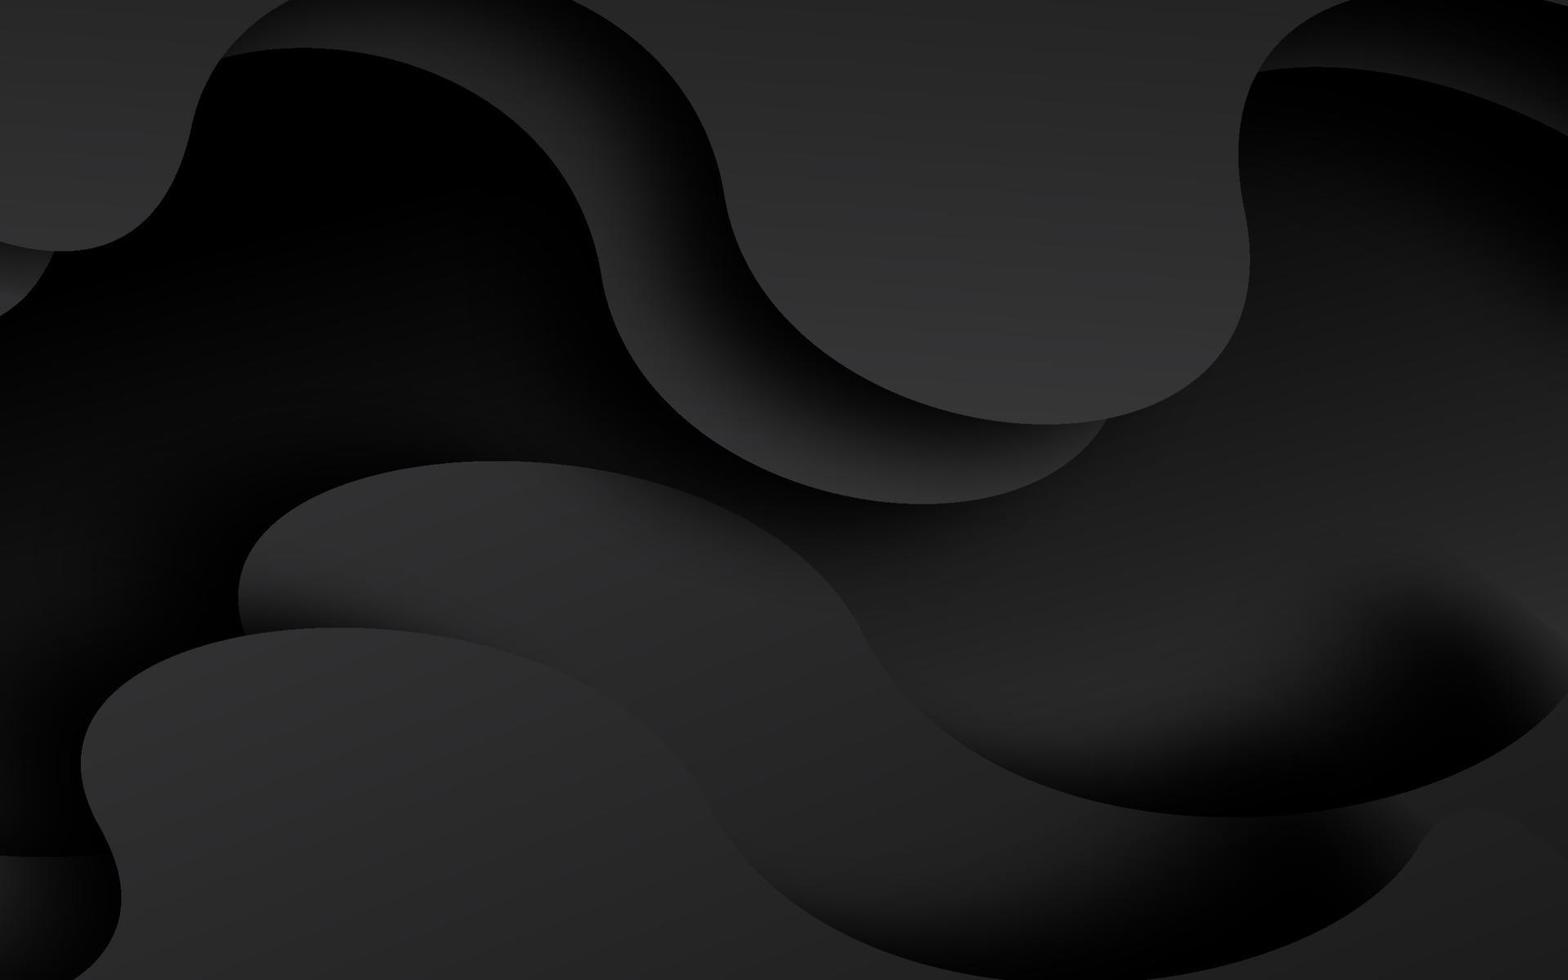 Abstract black wave shape background vector